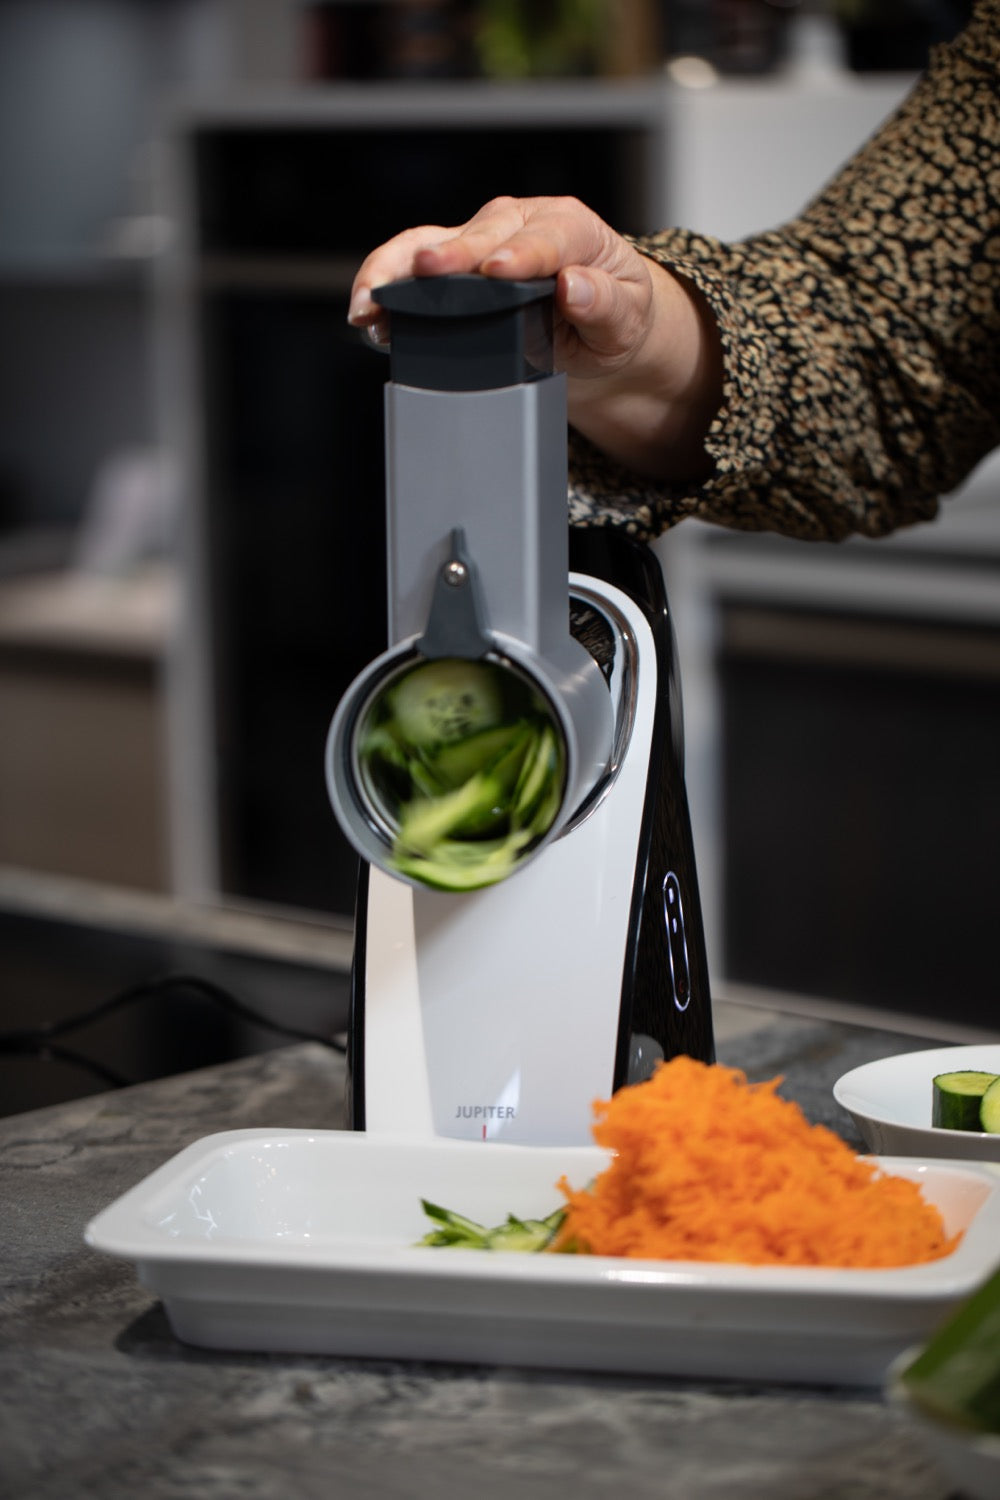 JUPITER vegetable slicer and cheese grater attachment for